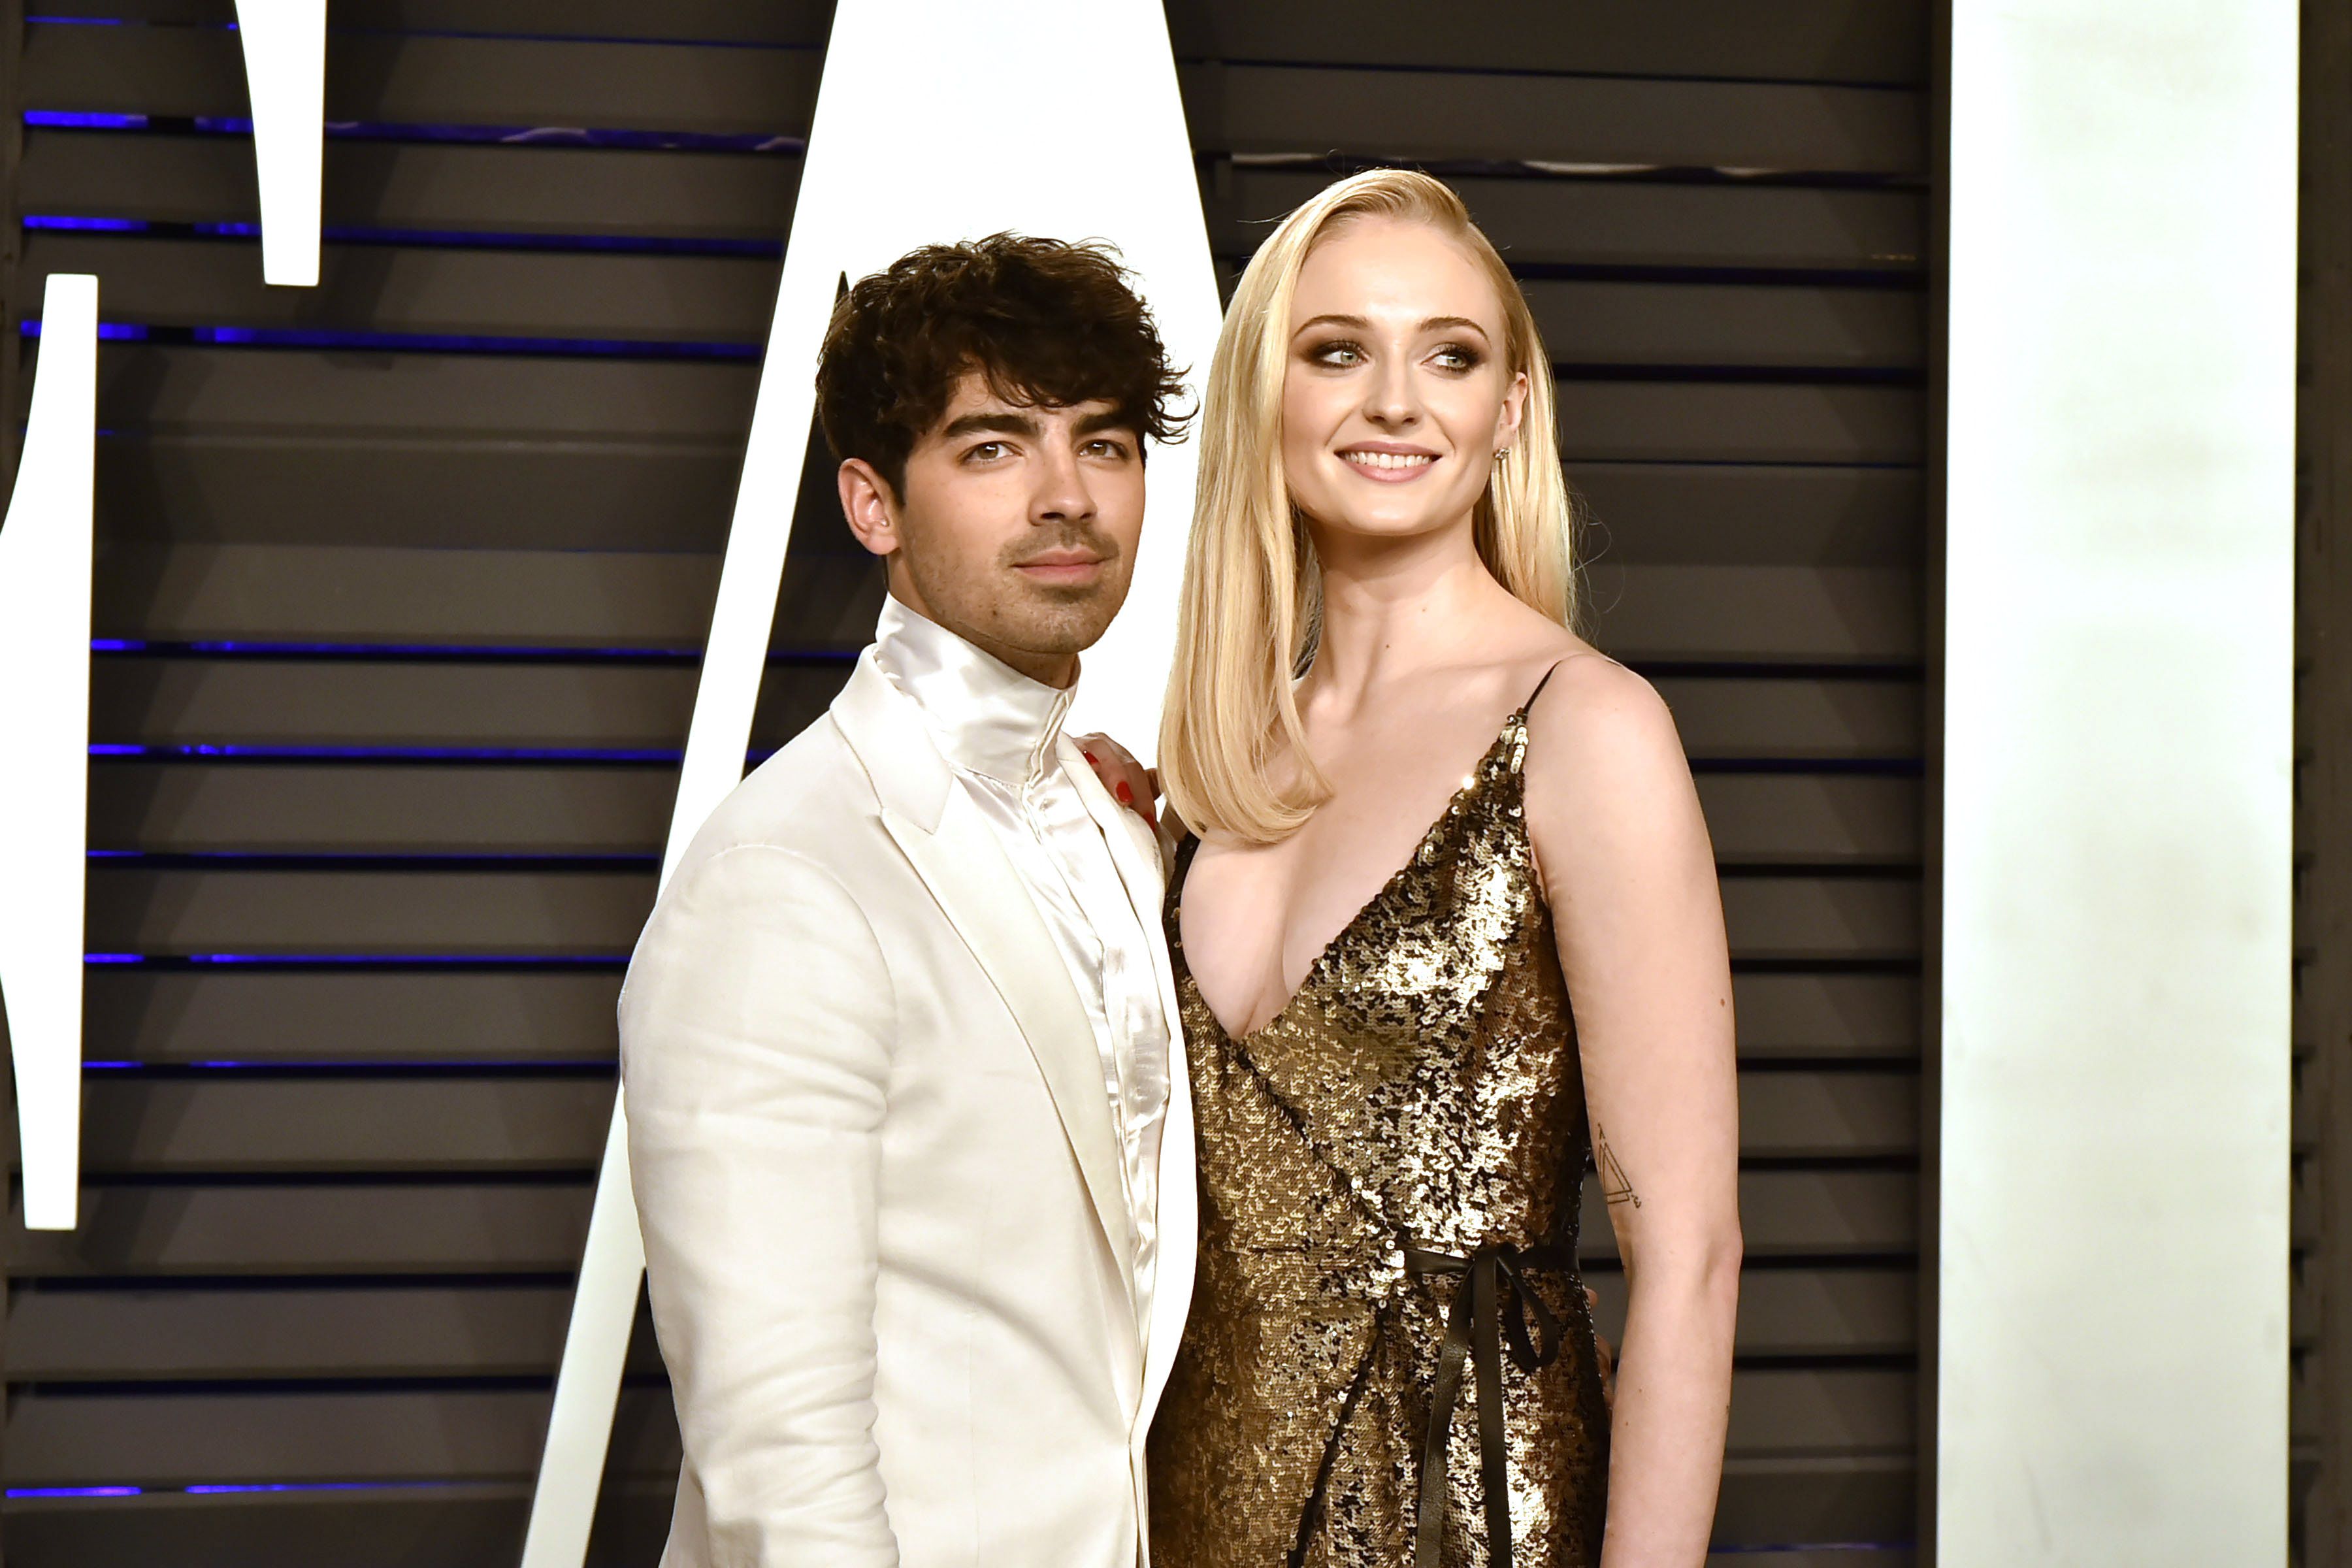 Joe Jonas and Sophie Turner say they have 'mutually decided to